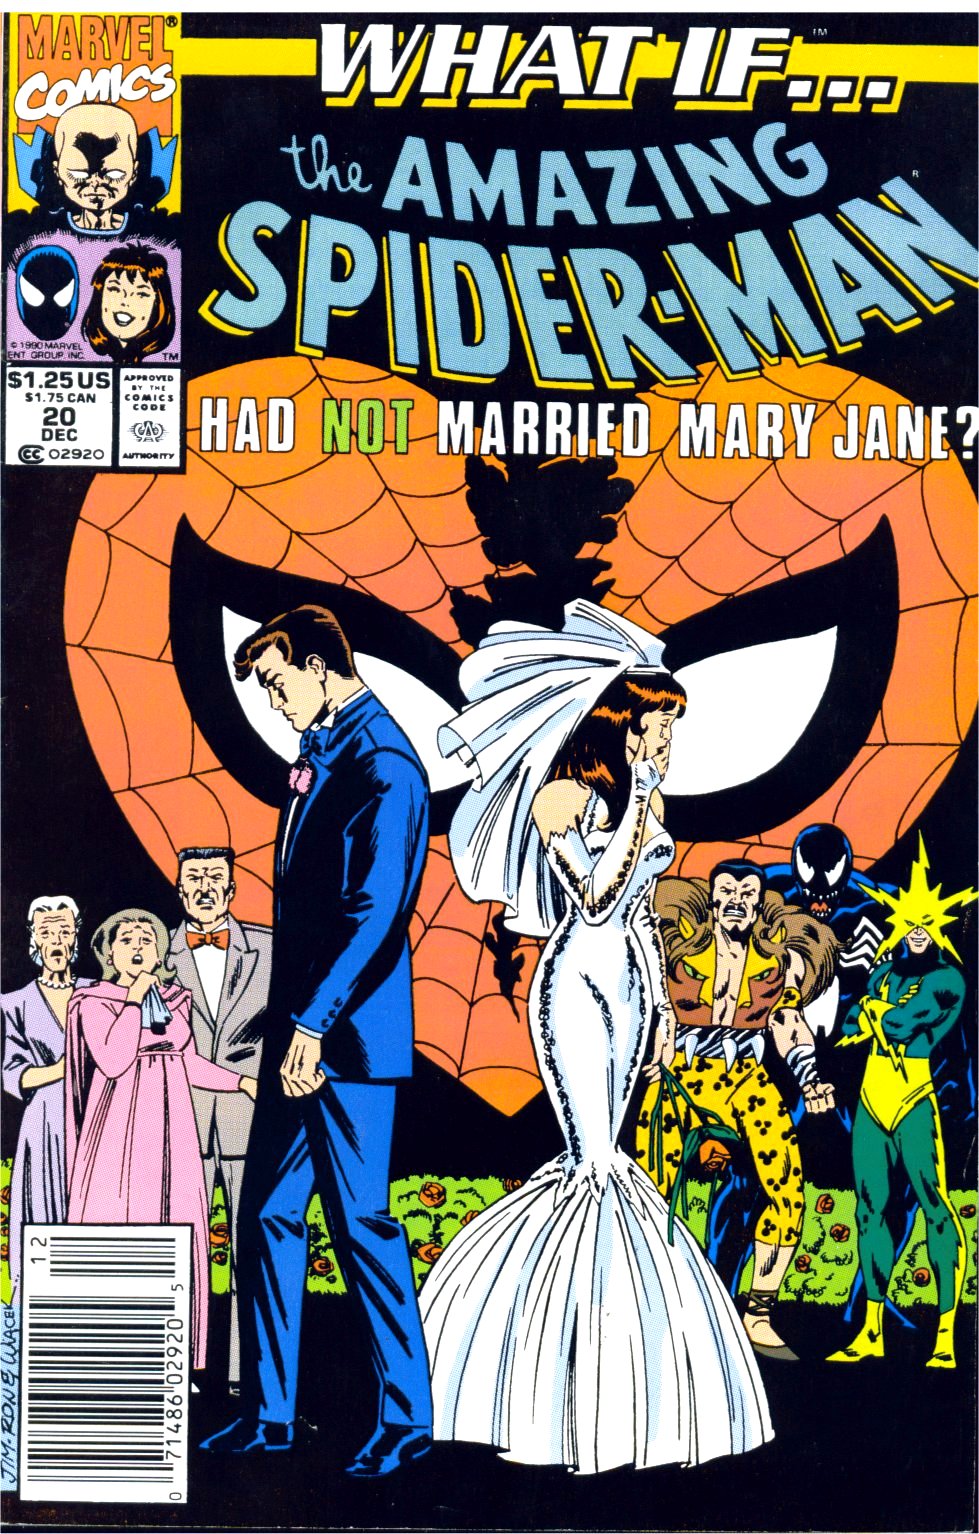 [the+amazing+spider-man+had+not+married+mary+jane.jpg]